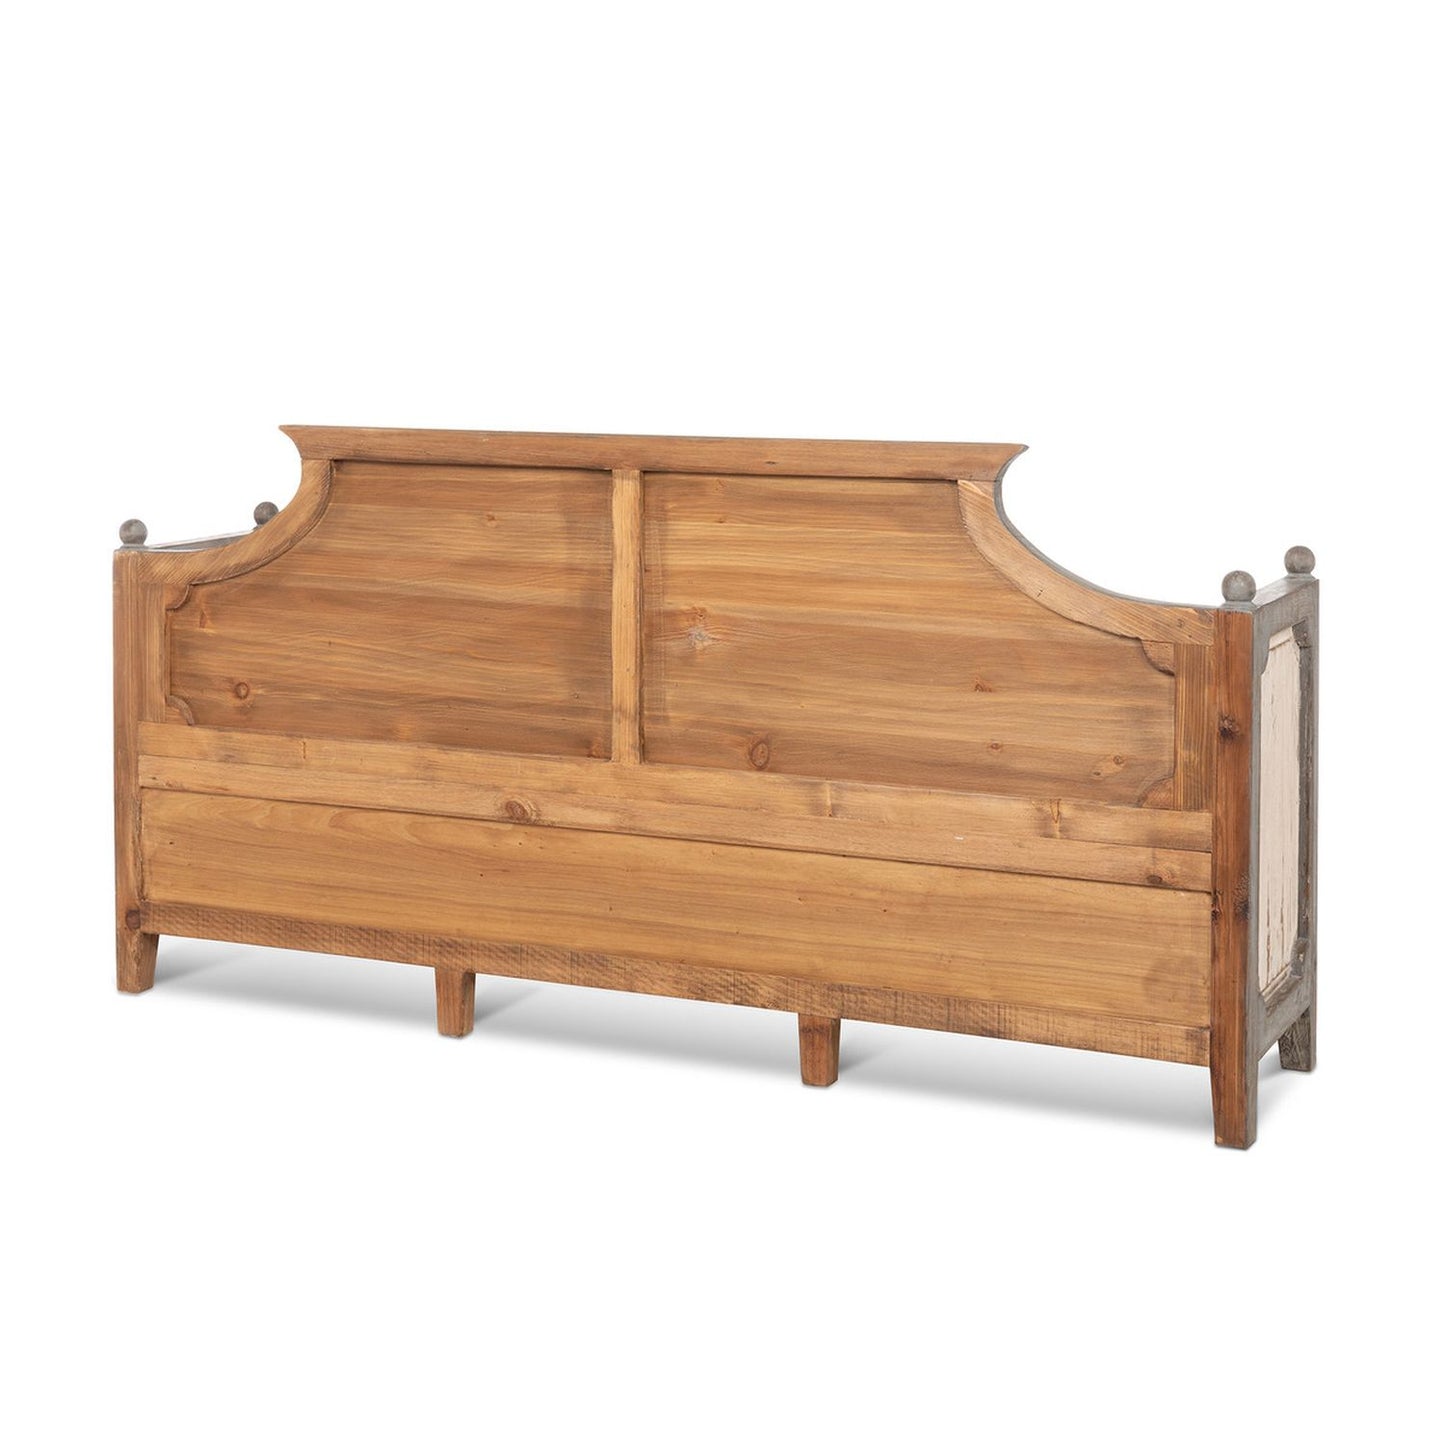 Park Hill Collection Simone Wooden Bench